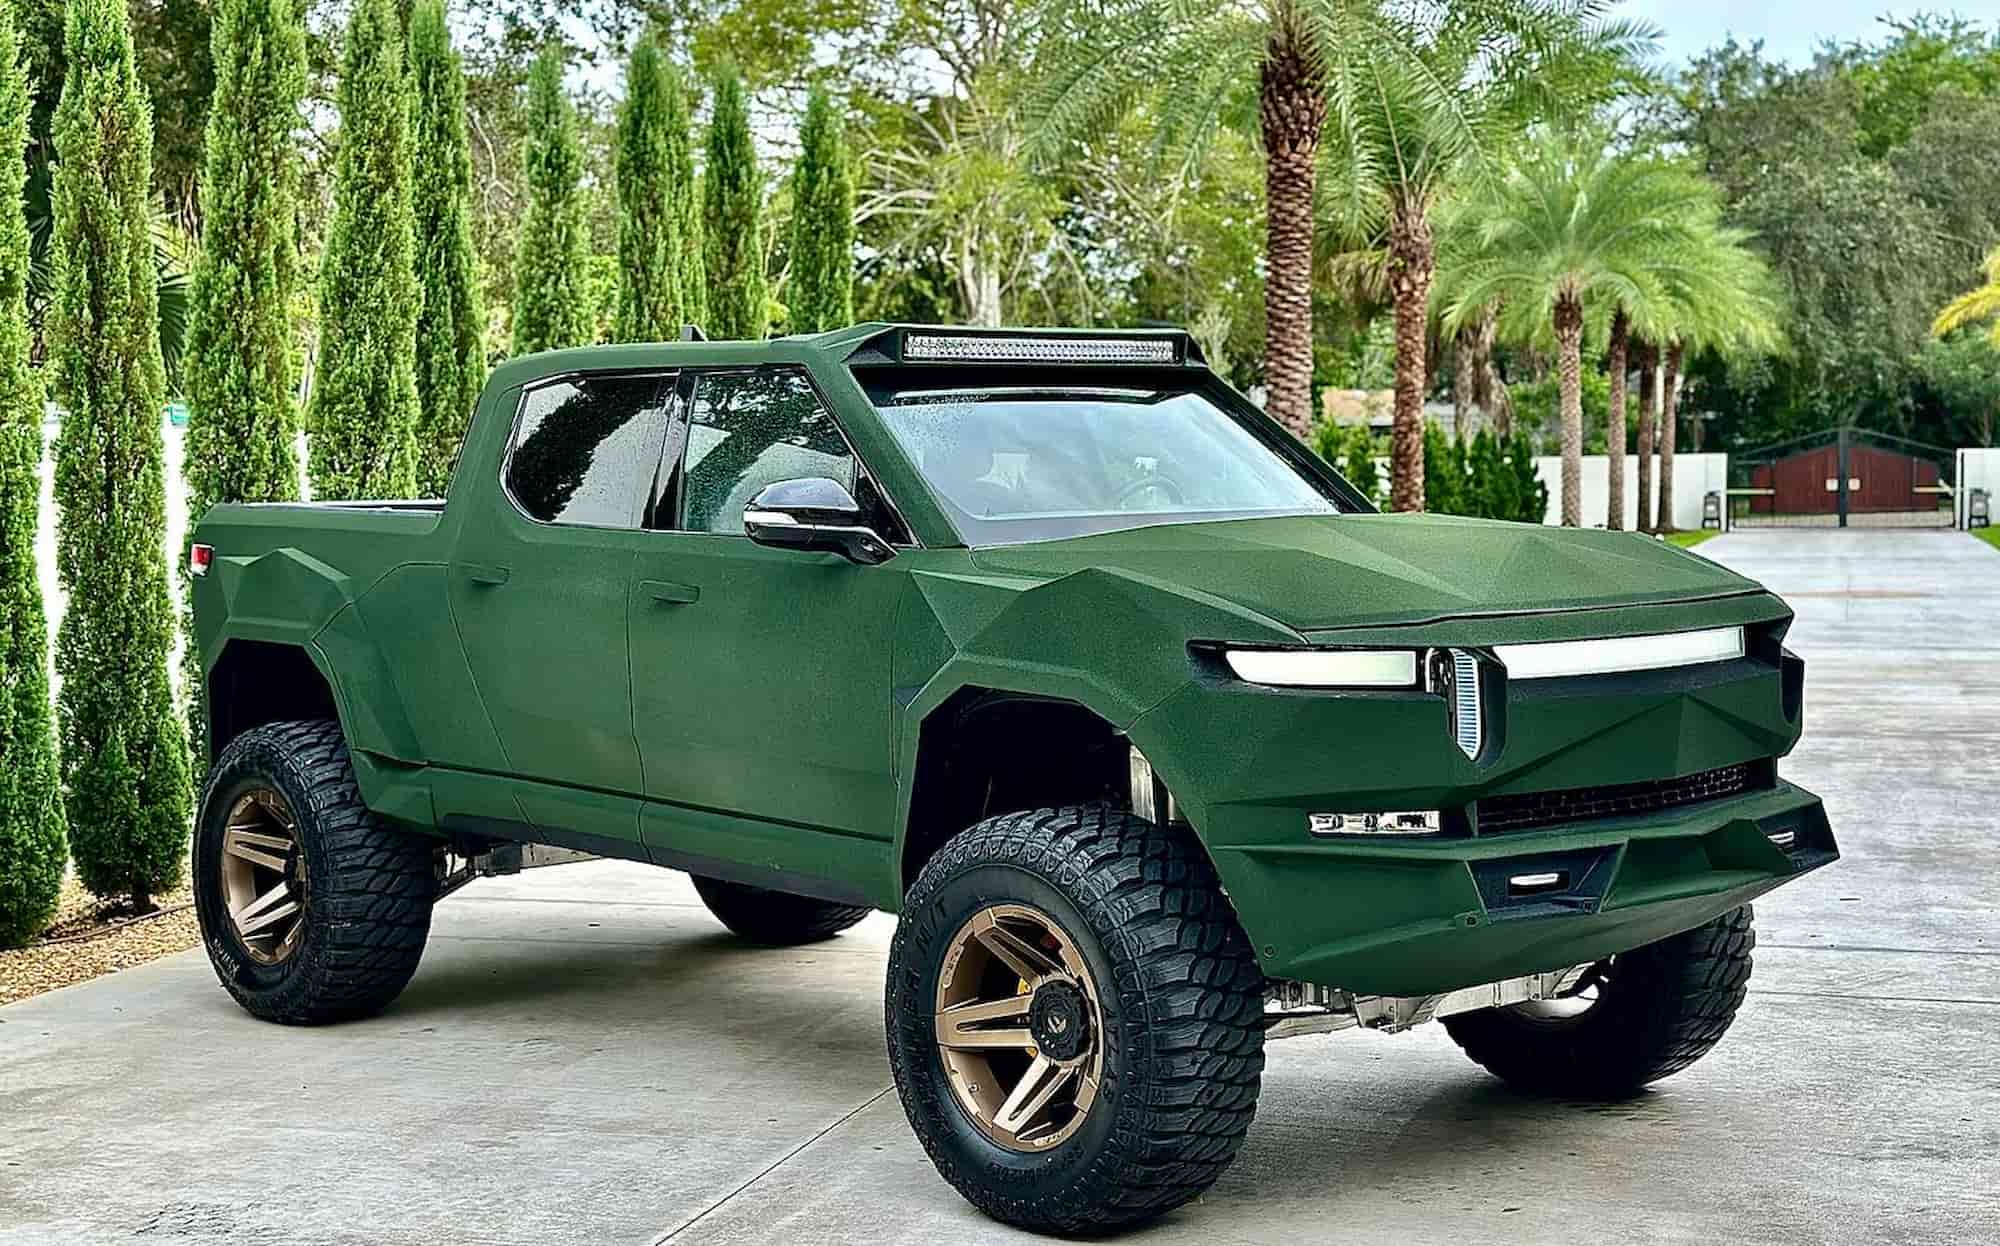 meet the apocalypse nirvana a rad rivian r1t on steroids claiming some outrageous numbers 3